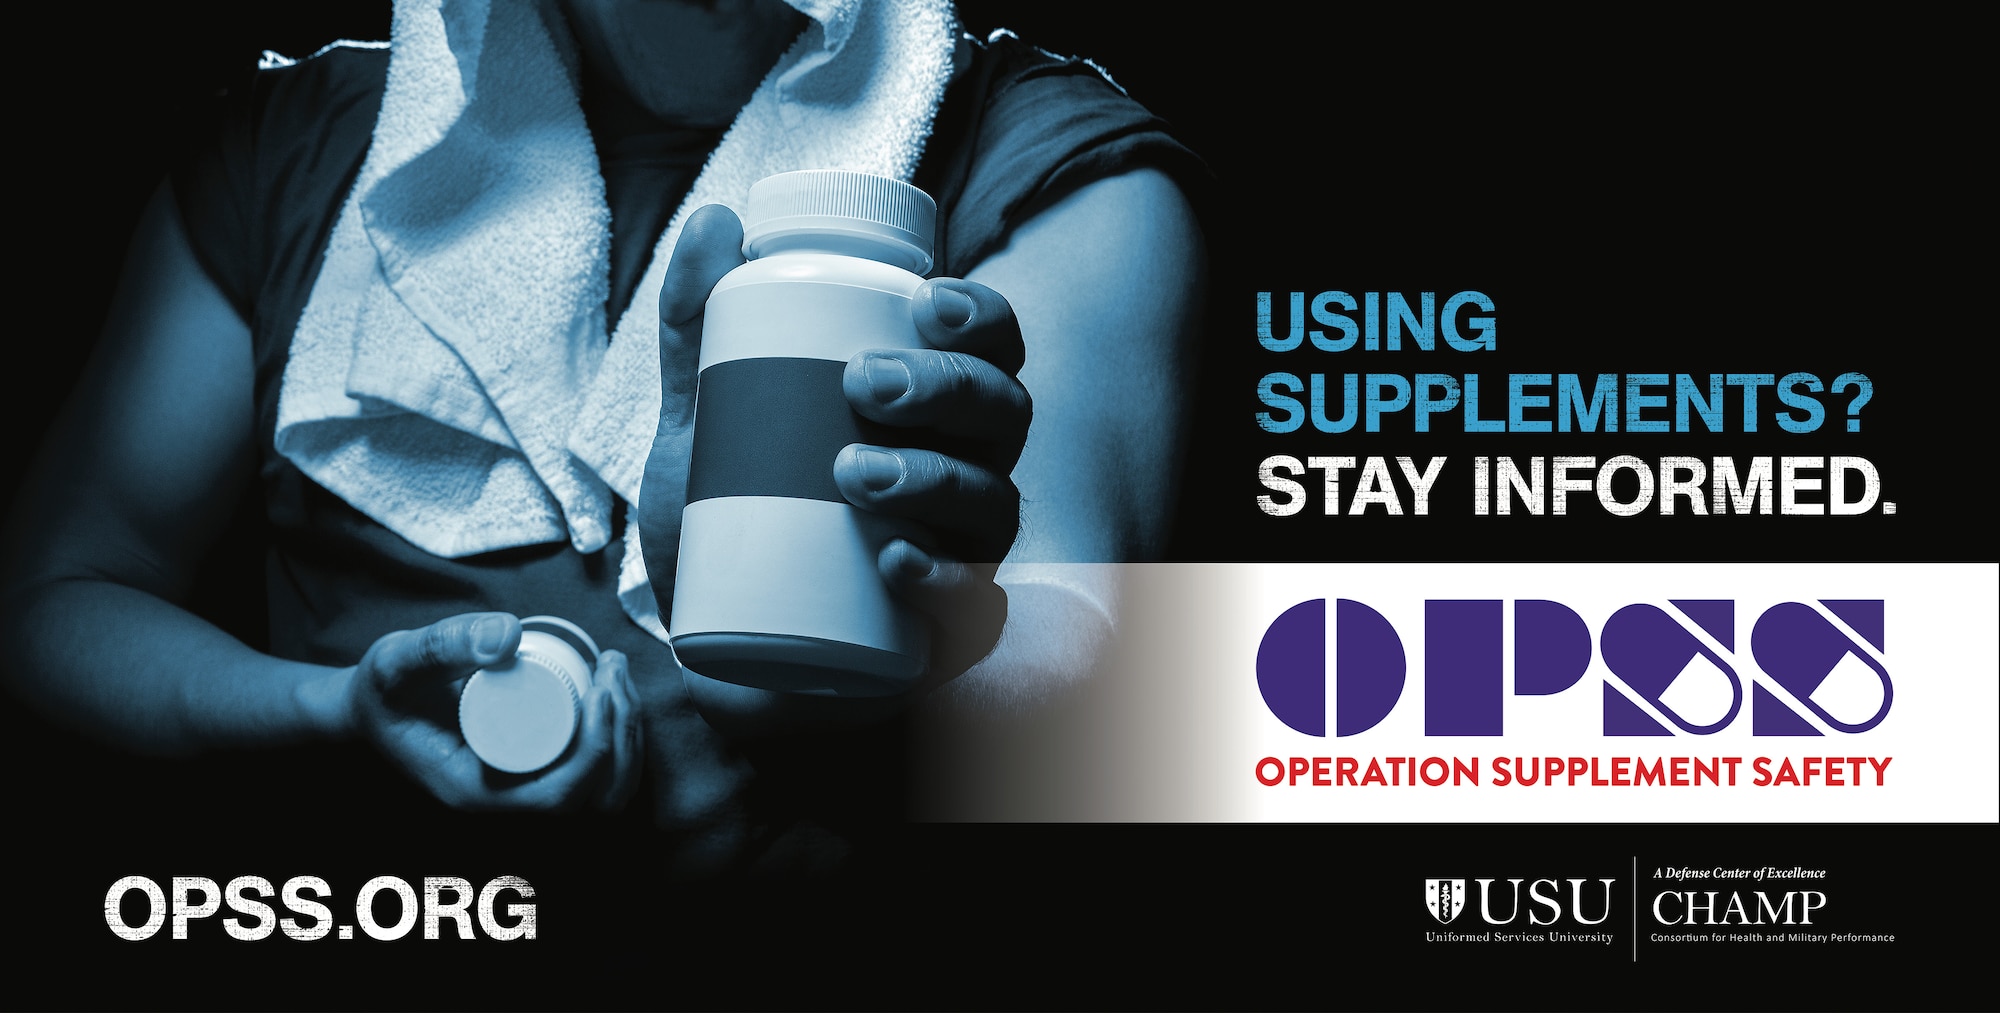 Operation Supplement Safety (OPSS), an ongoing program under the Consortium for Health and Military Performance at the Uniformed Services University of the Health Sciences, provides military service members and their families, healthcare providers, and leaders, up-to-date information about dietary supplements.